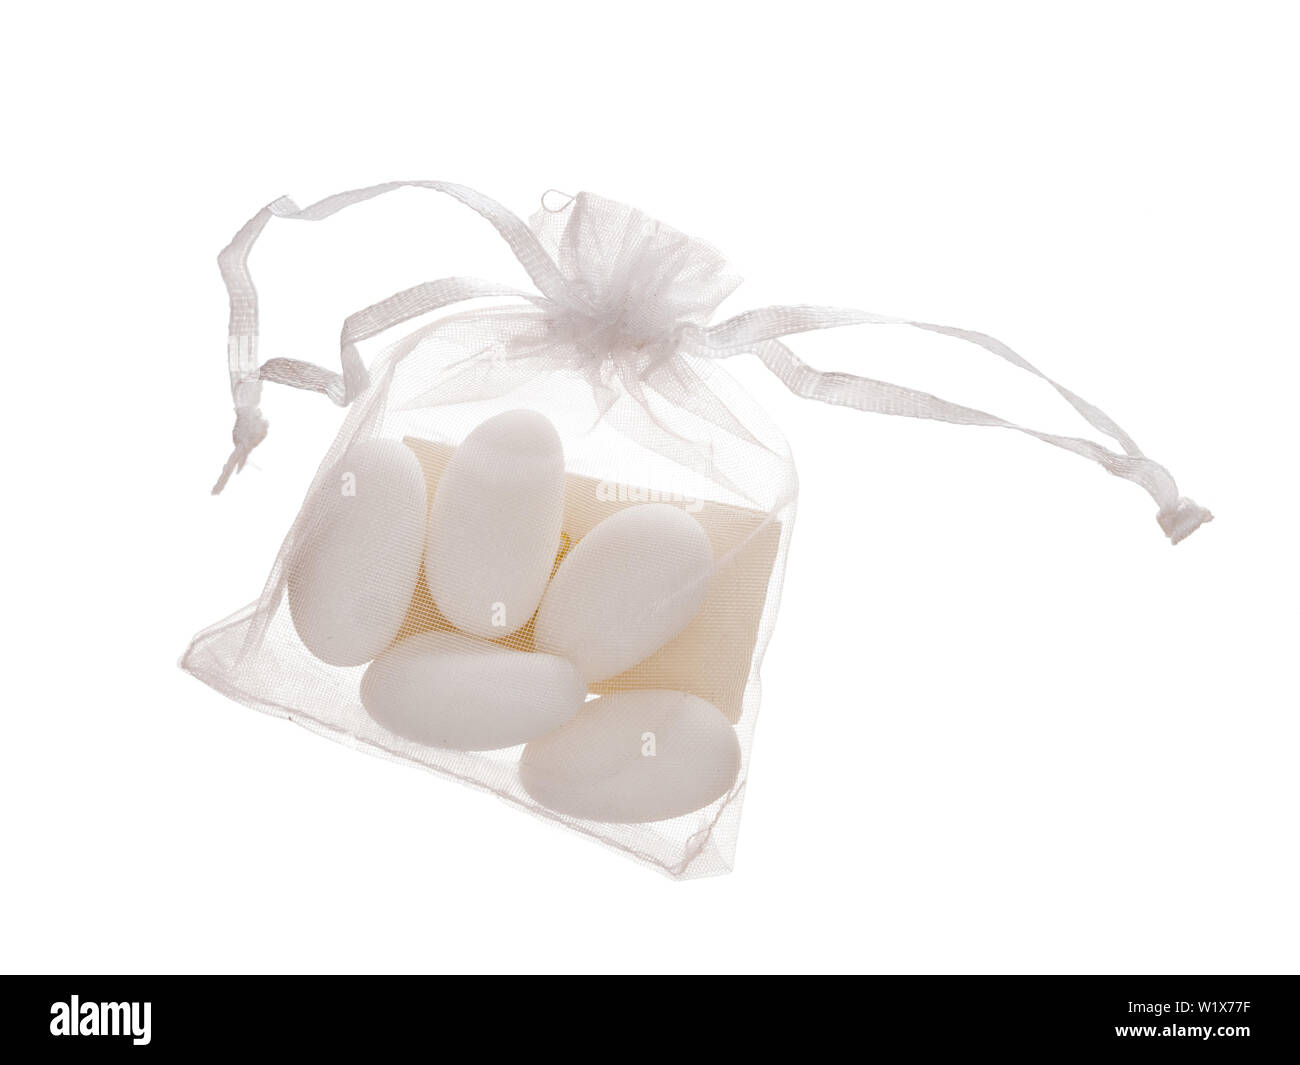 Bag of sweets Cut Out Stock Images & Pictures - Alamy